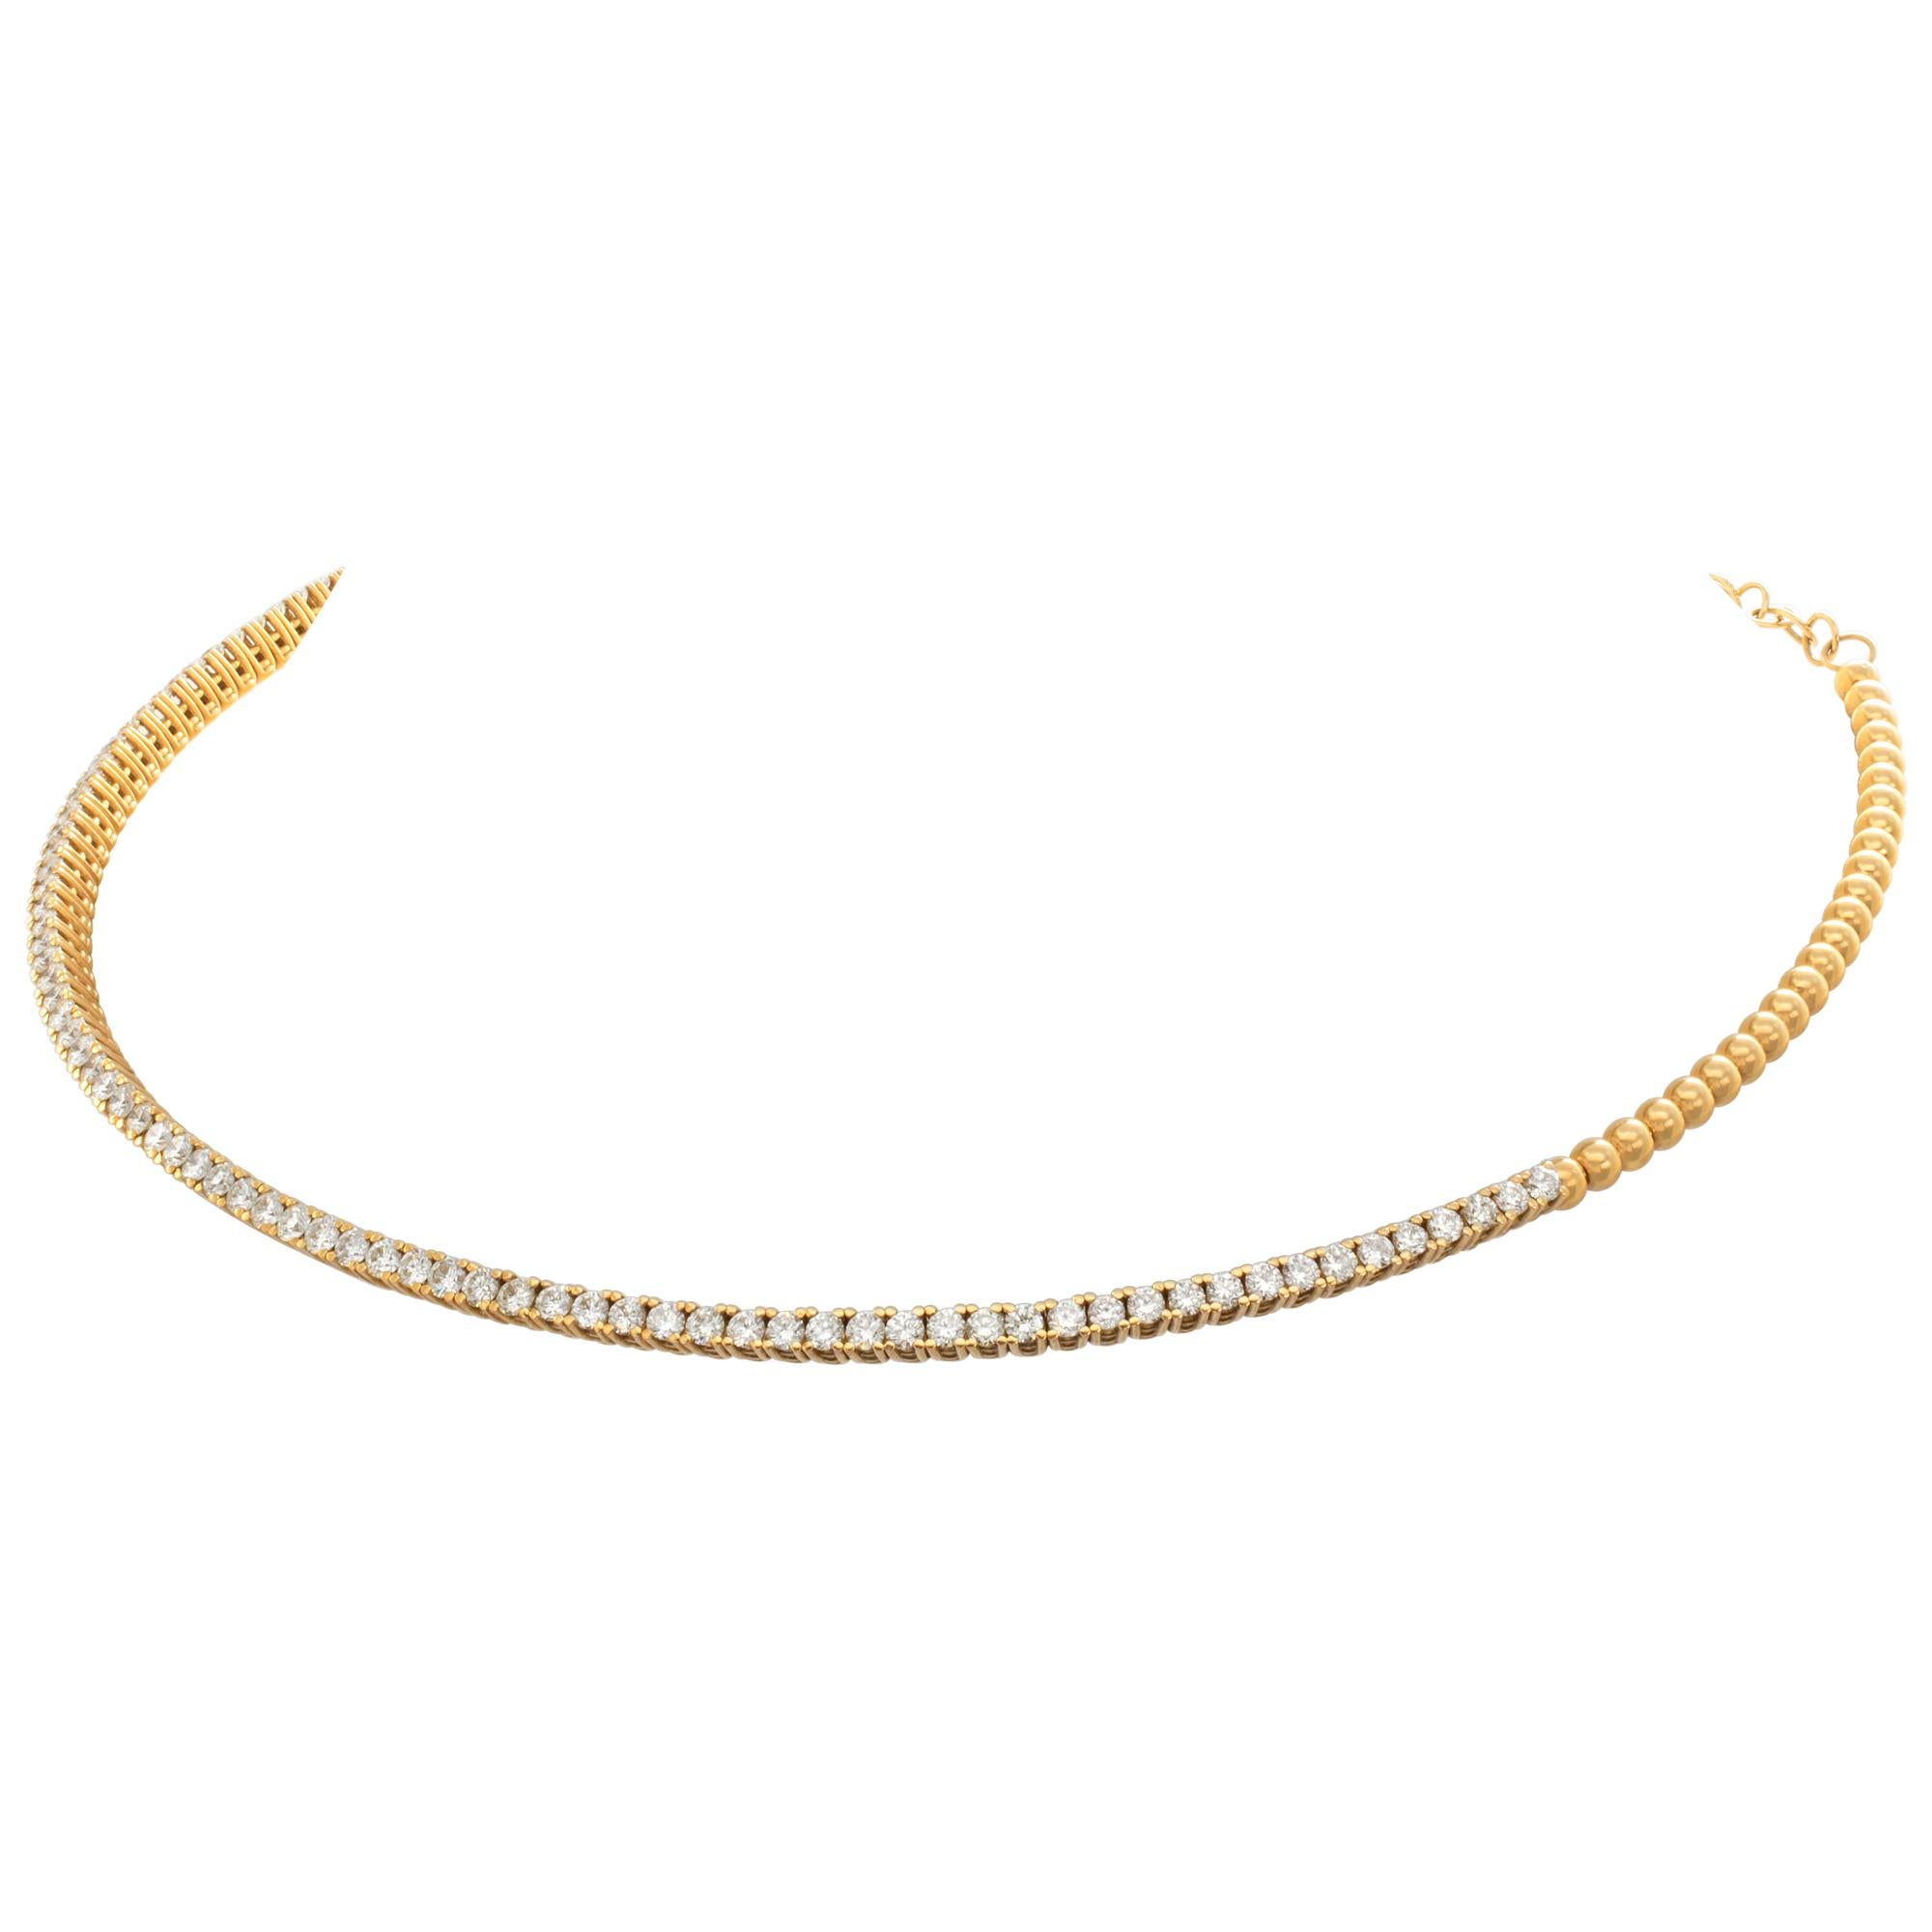 Diamond choker in 18k yellow gold with approximately 3 carats in G-H color, VS clarity round brilliant cut diamonds. Choker comes with the chain to adjust the size.